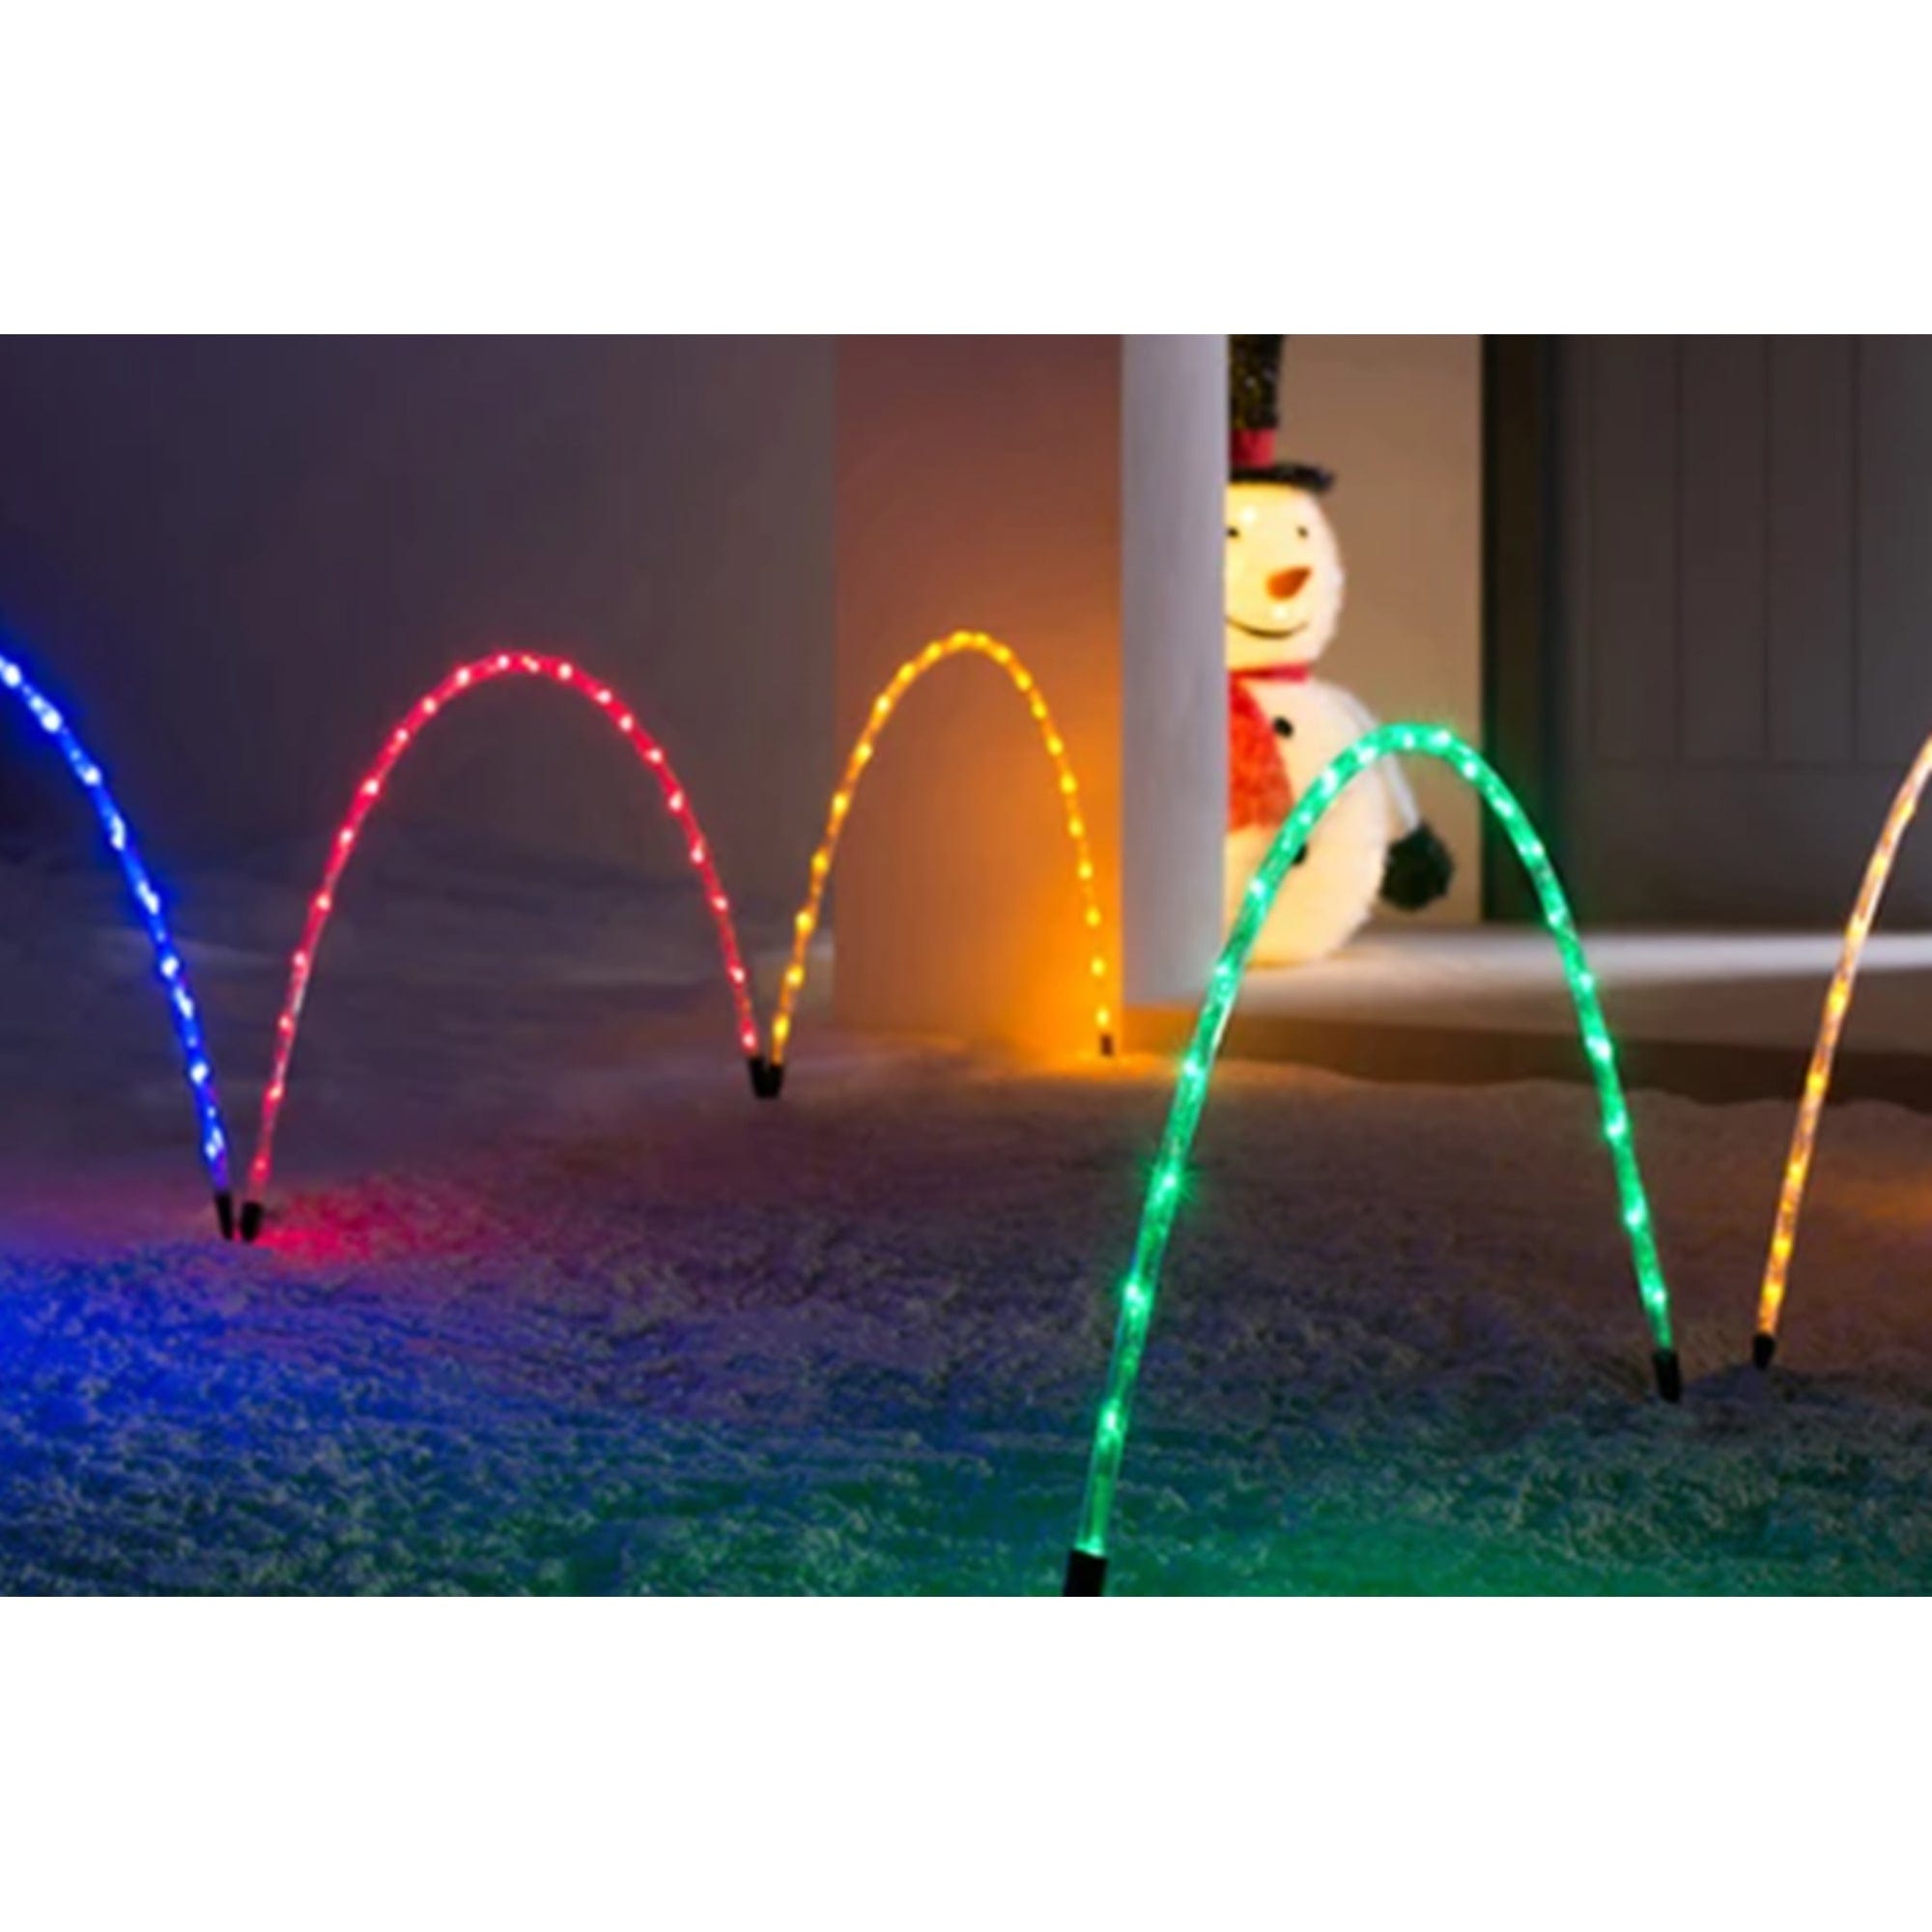 Lexi Lighting Christmas Path Light Set of 4 Arch Pathway Candy Cane Lights - 2 Colour Options